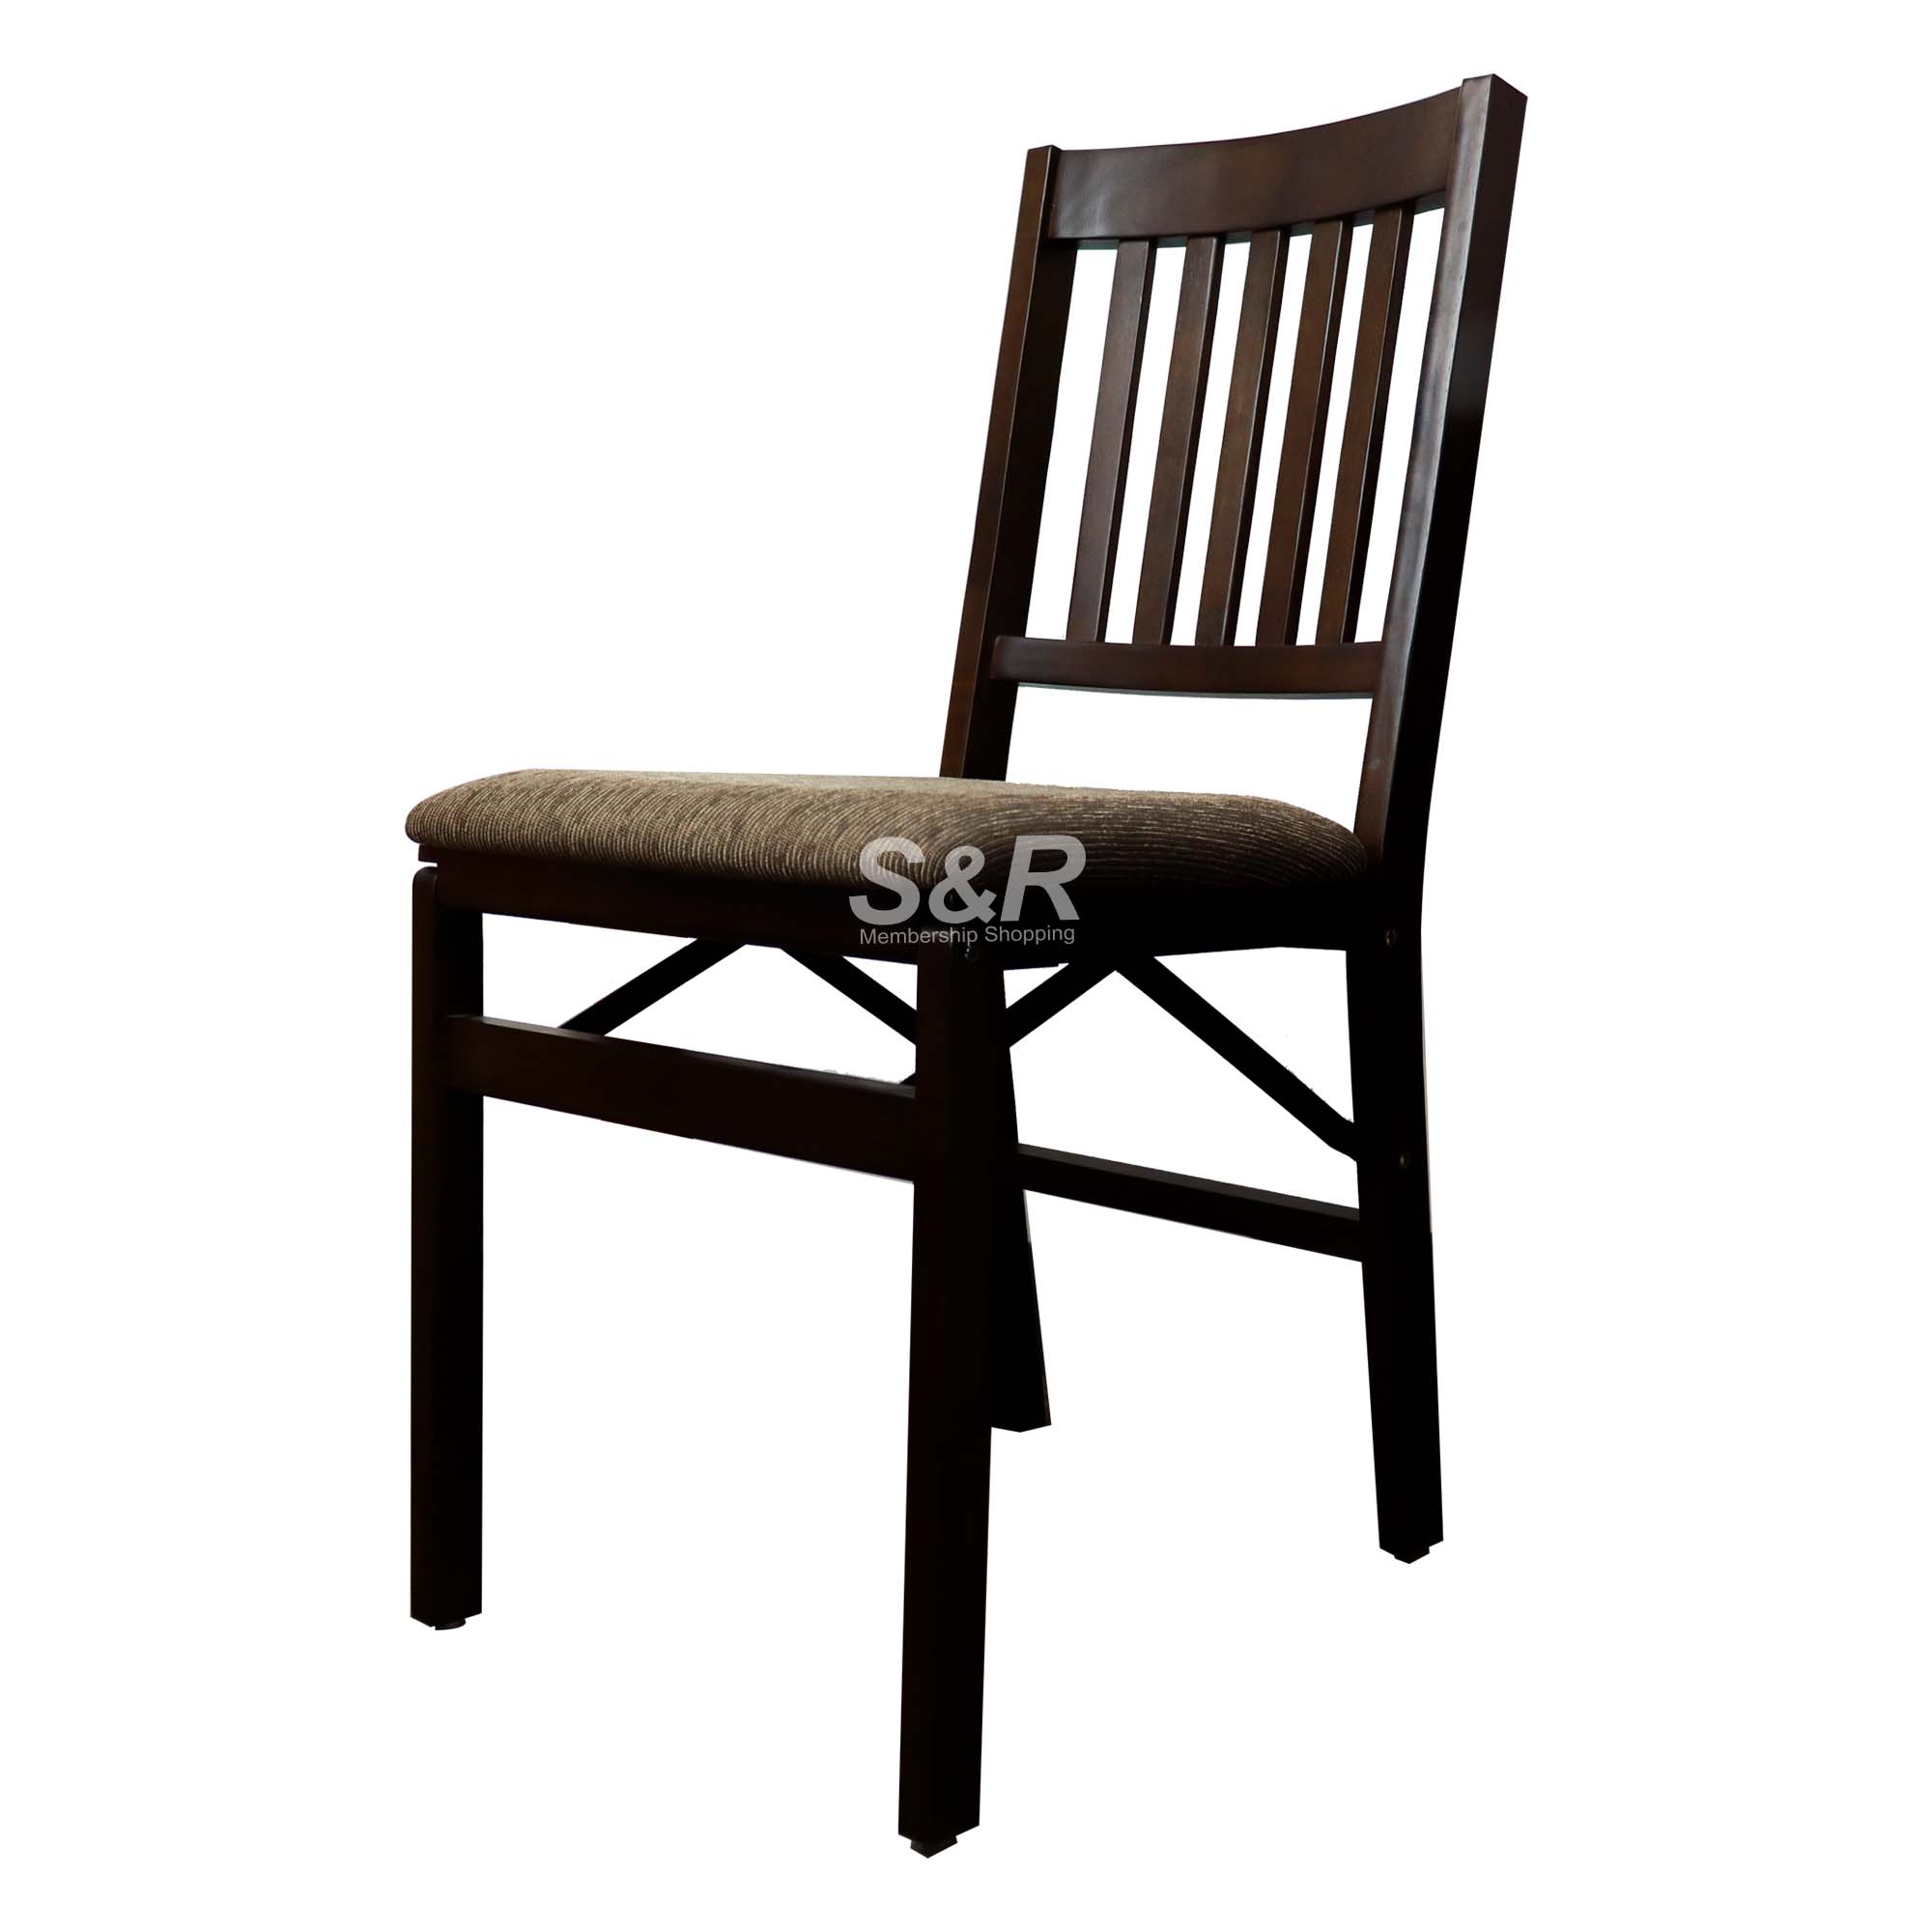 Stakmore Folding Chair 1pc